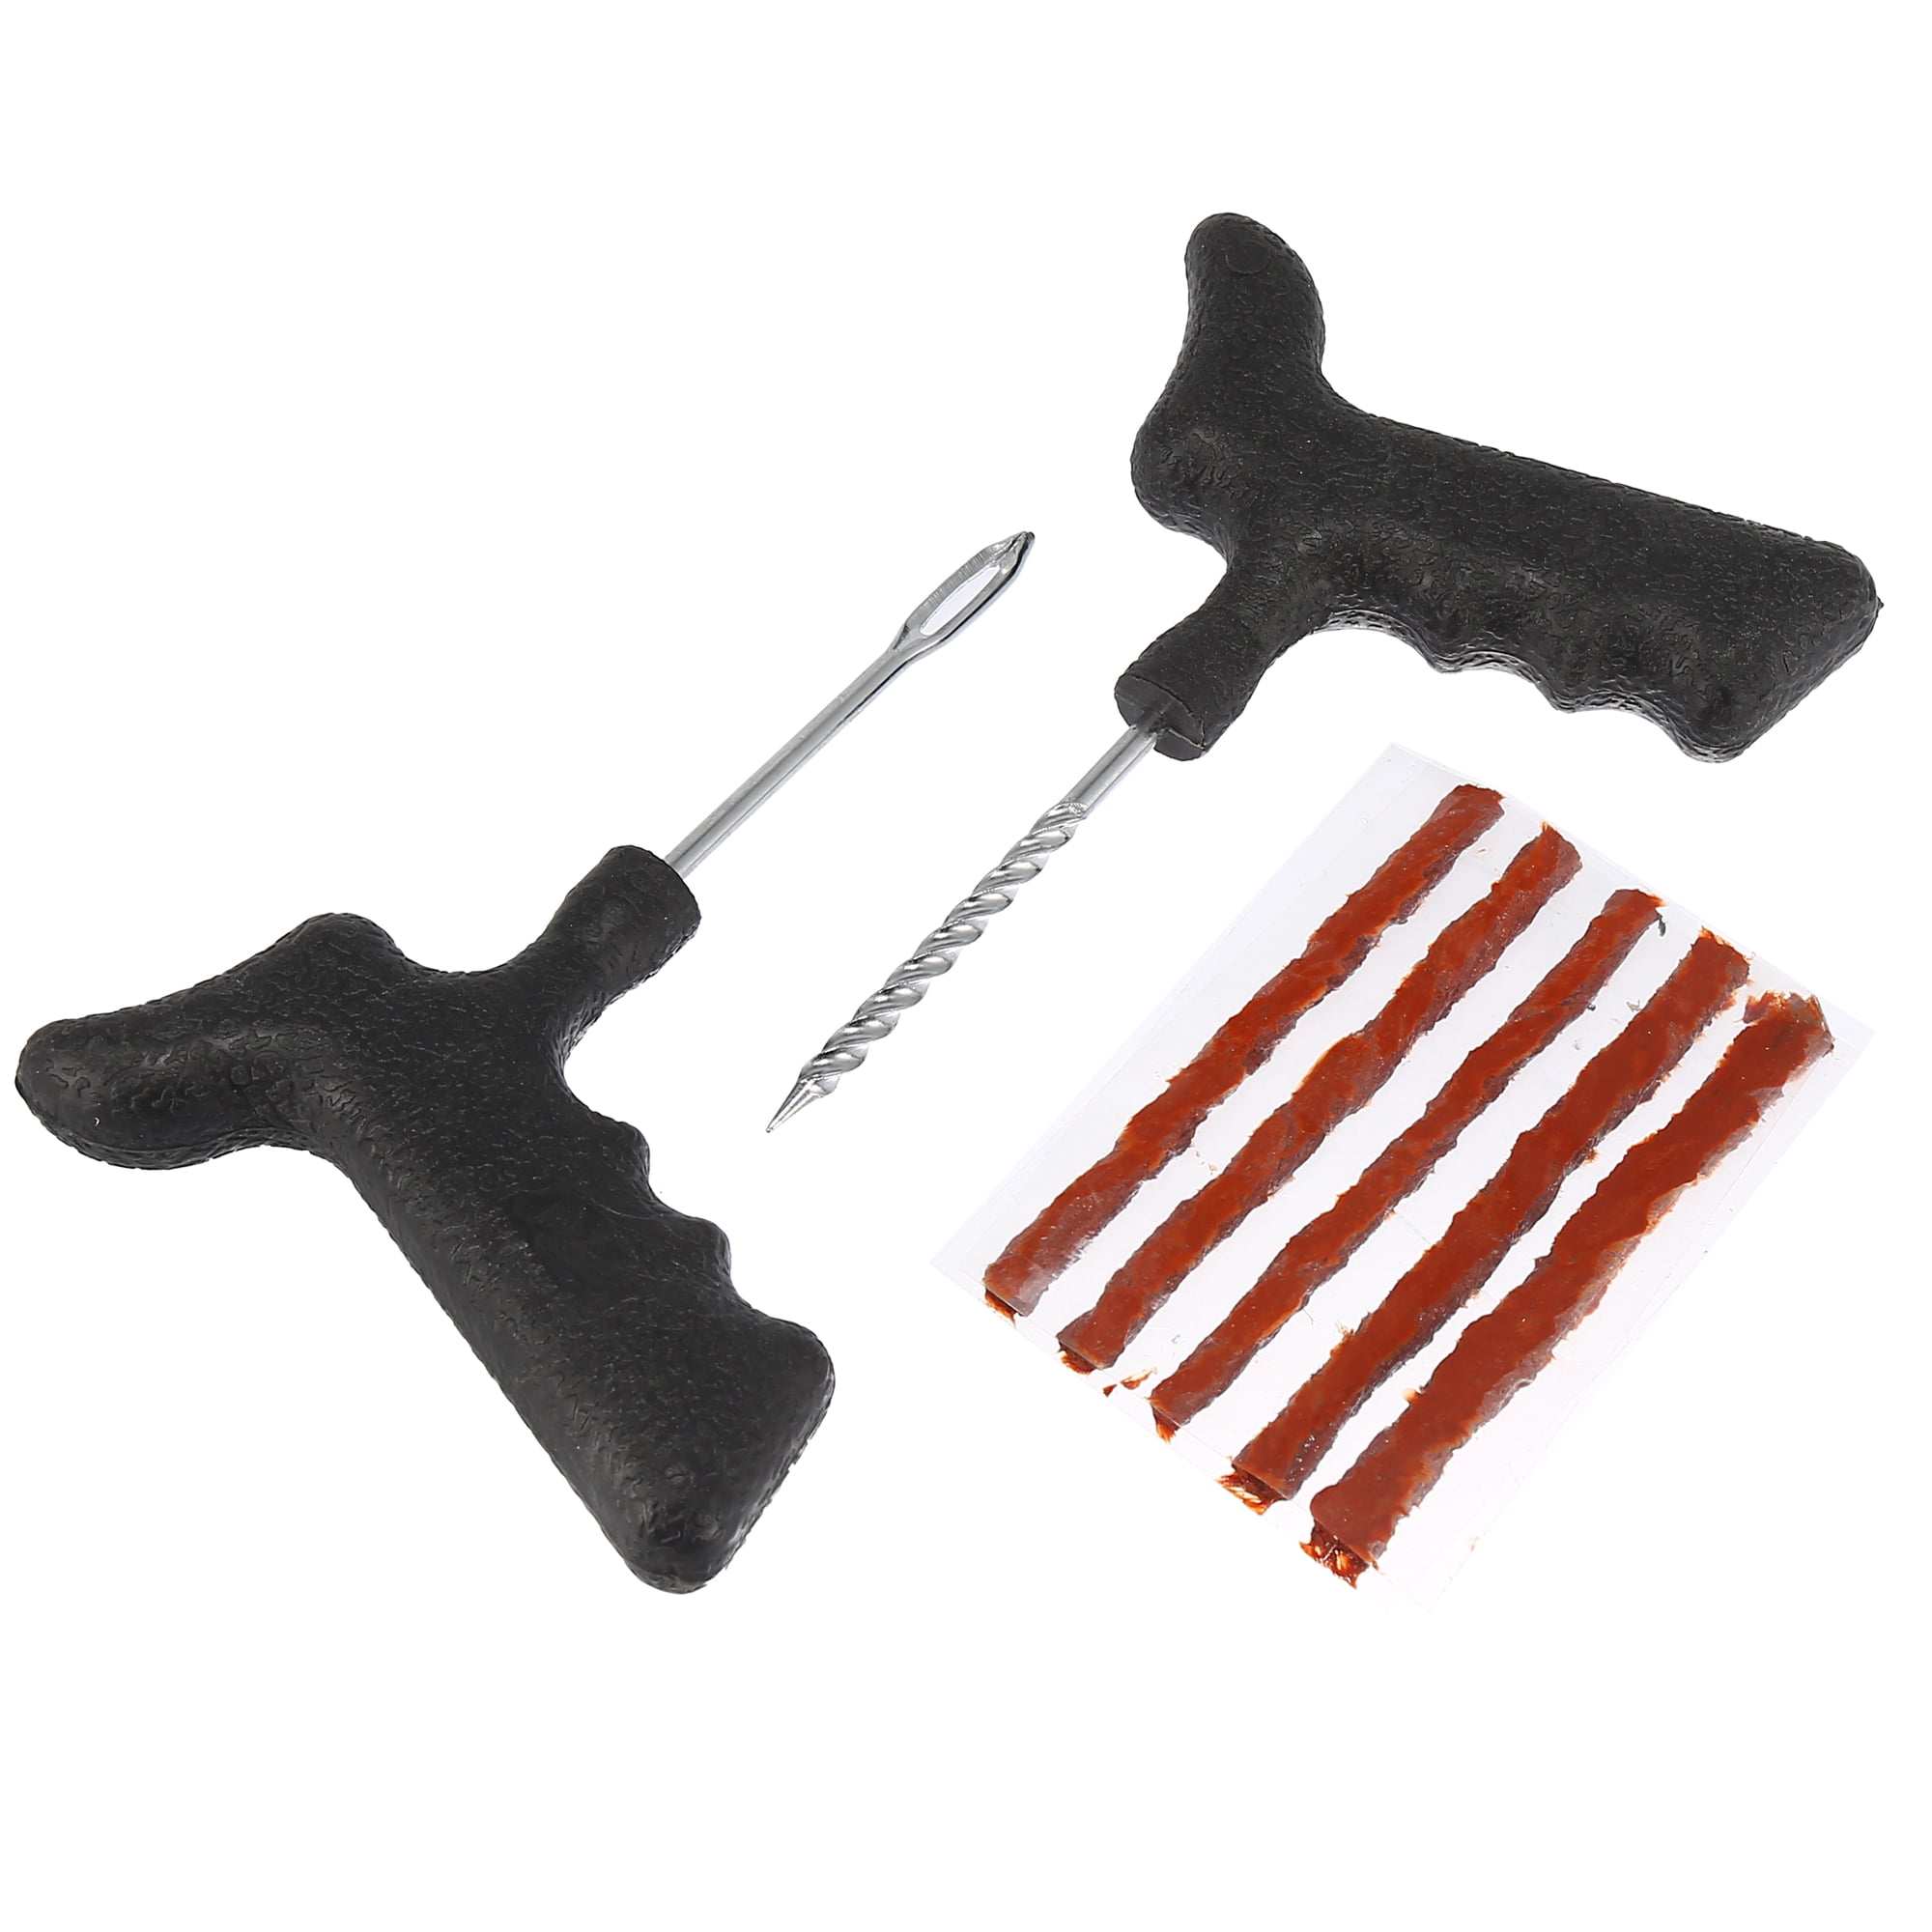 Bicycle Bike Tire Tube Repair Kit - 6 Rubber Patches + Sandpaper +